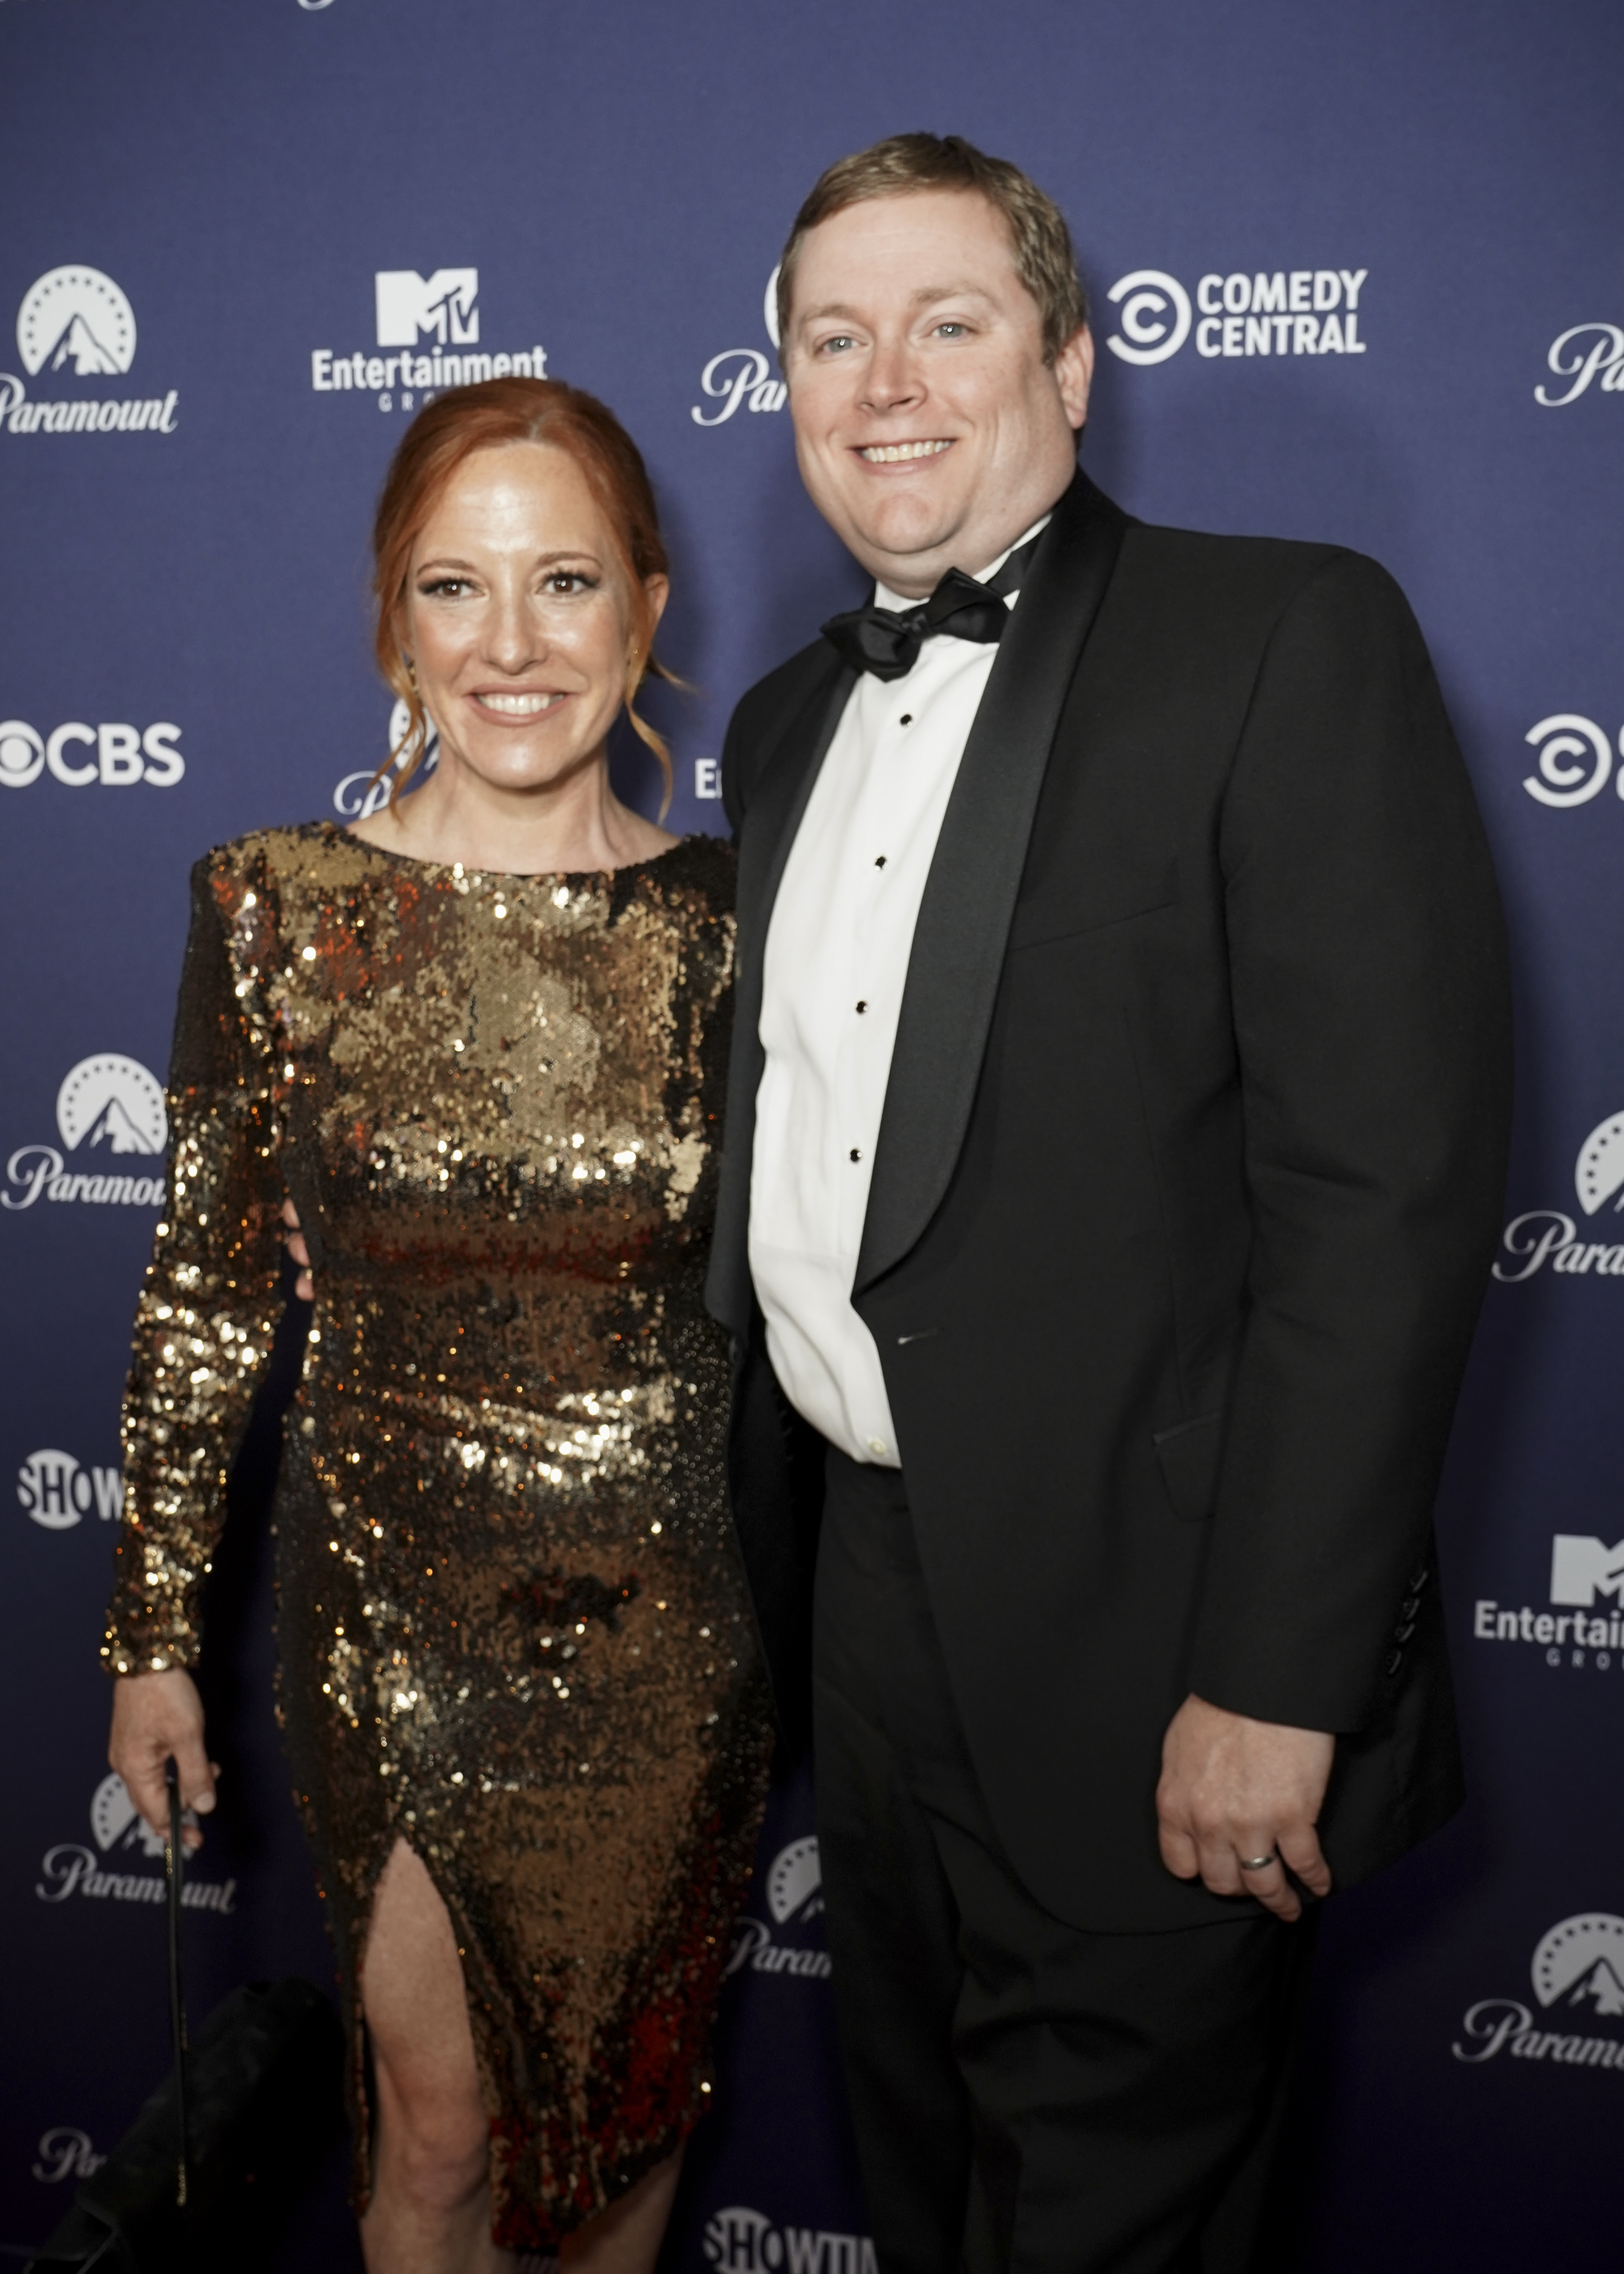 Jen Psaki and Gregory Mecher at the Paramount White House Correspondents' Dinner after party at the French Ambassador's residence, in Washington, D.C., in April 2022. | Source: Getty Images